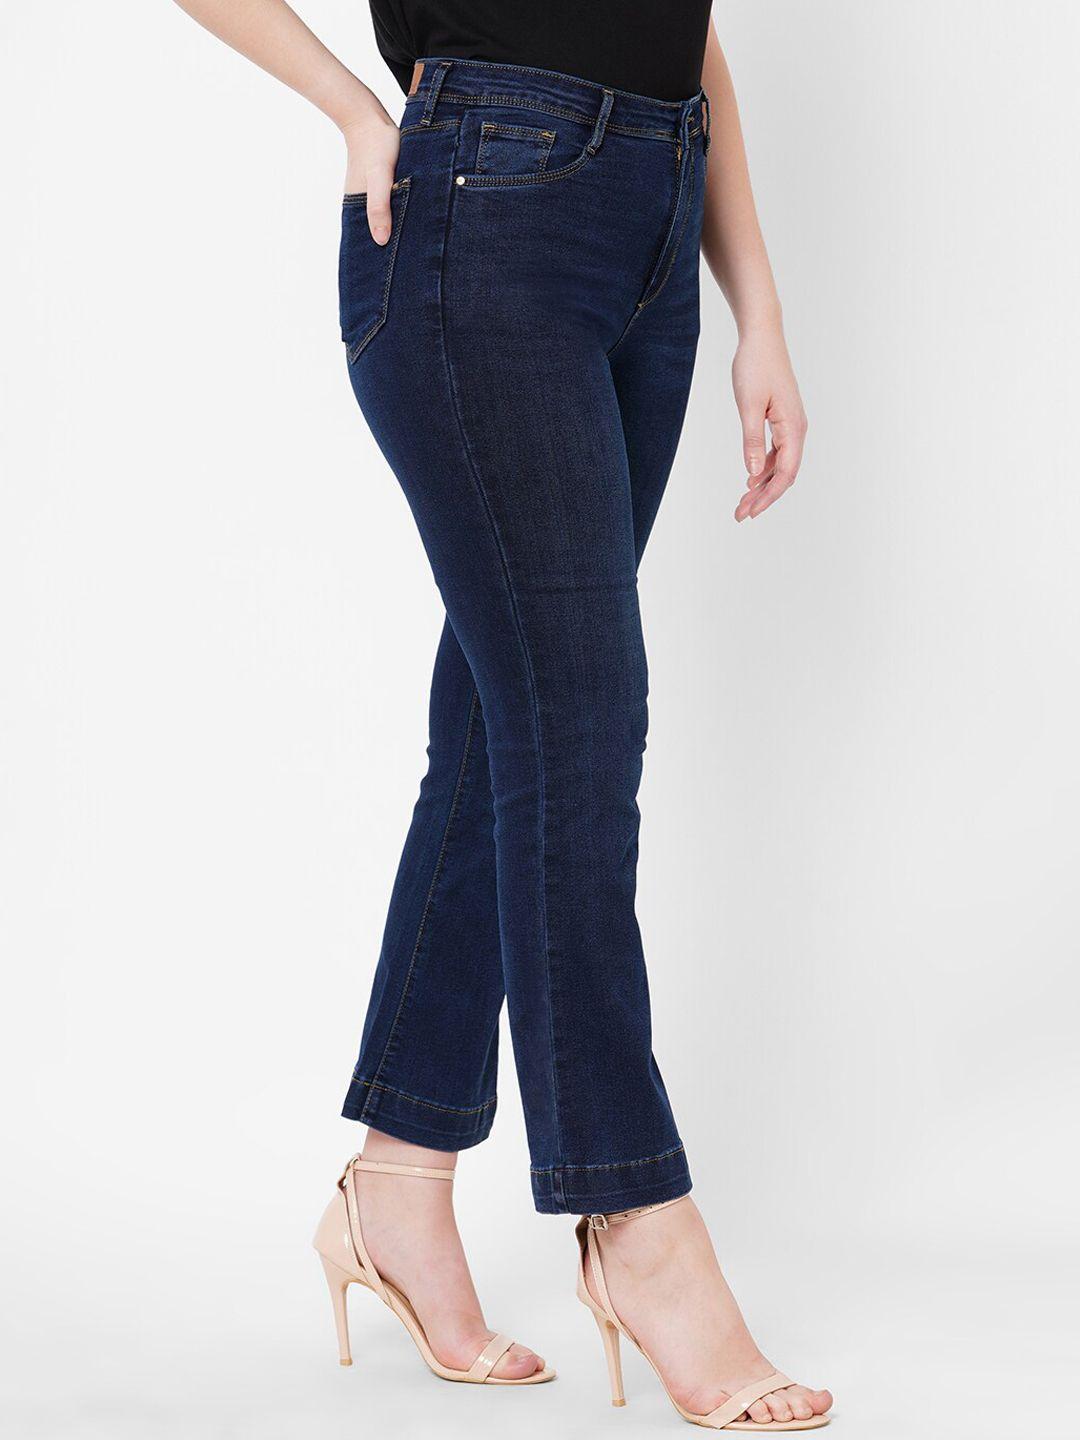 kraus-jeans-women-navy-blue-flared-high-rise-light-fade-stretchable-jeans